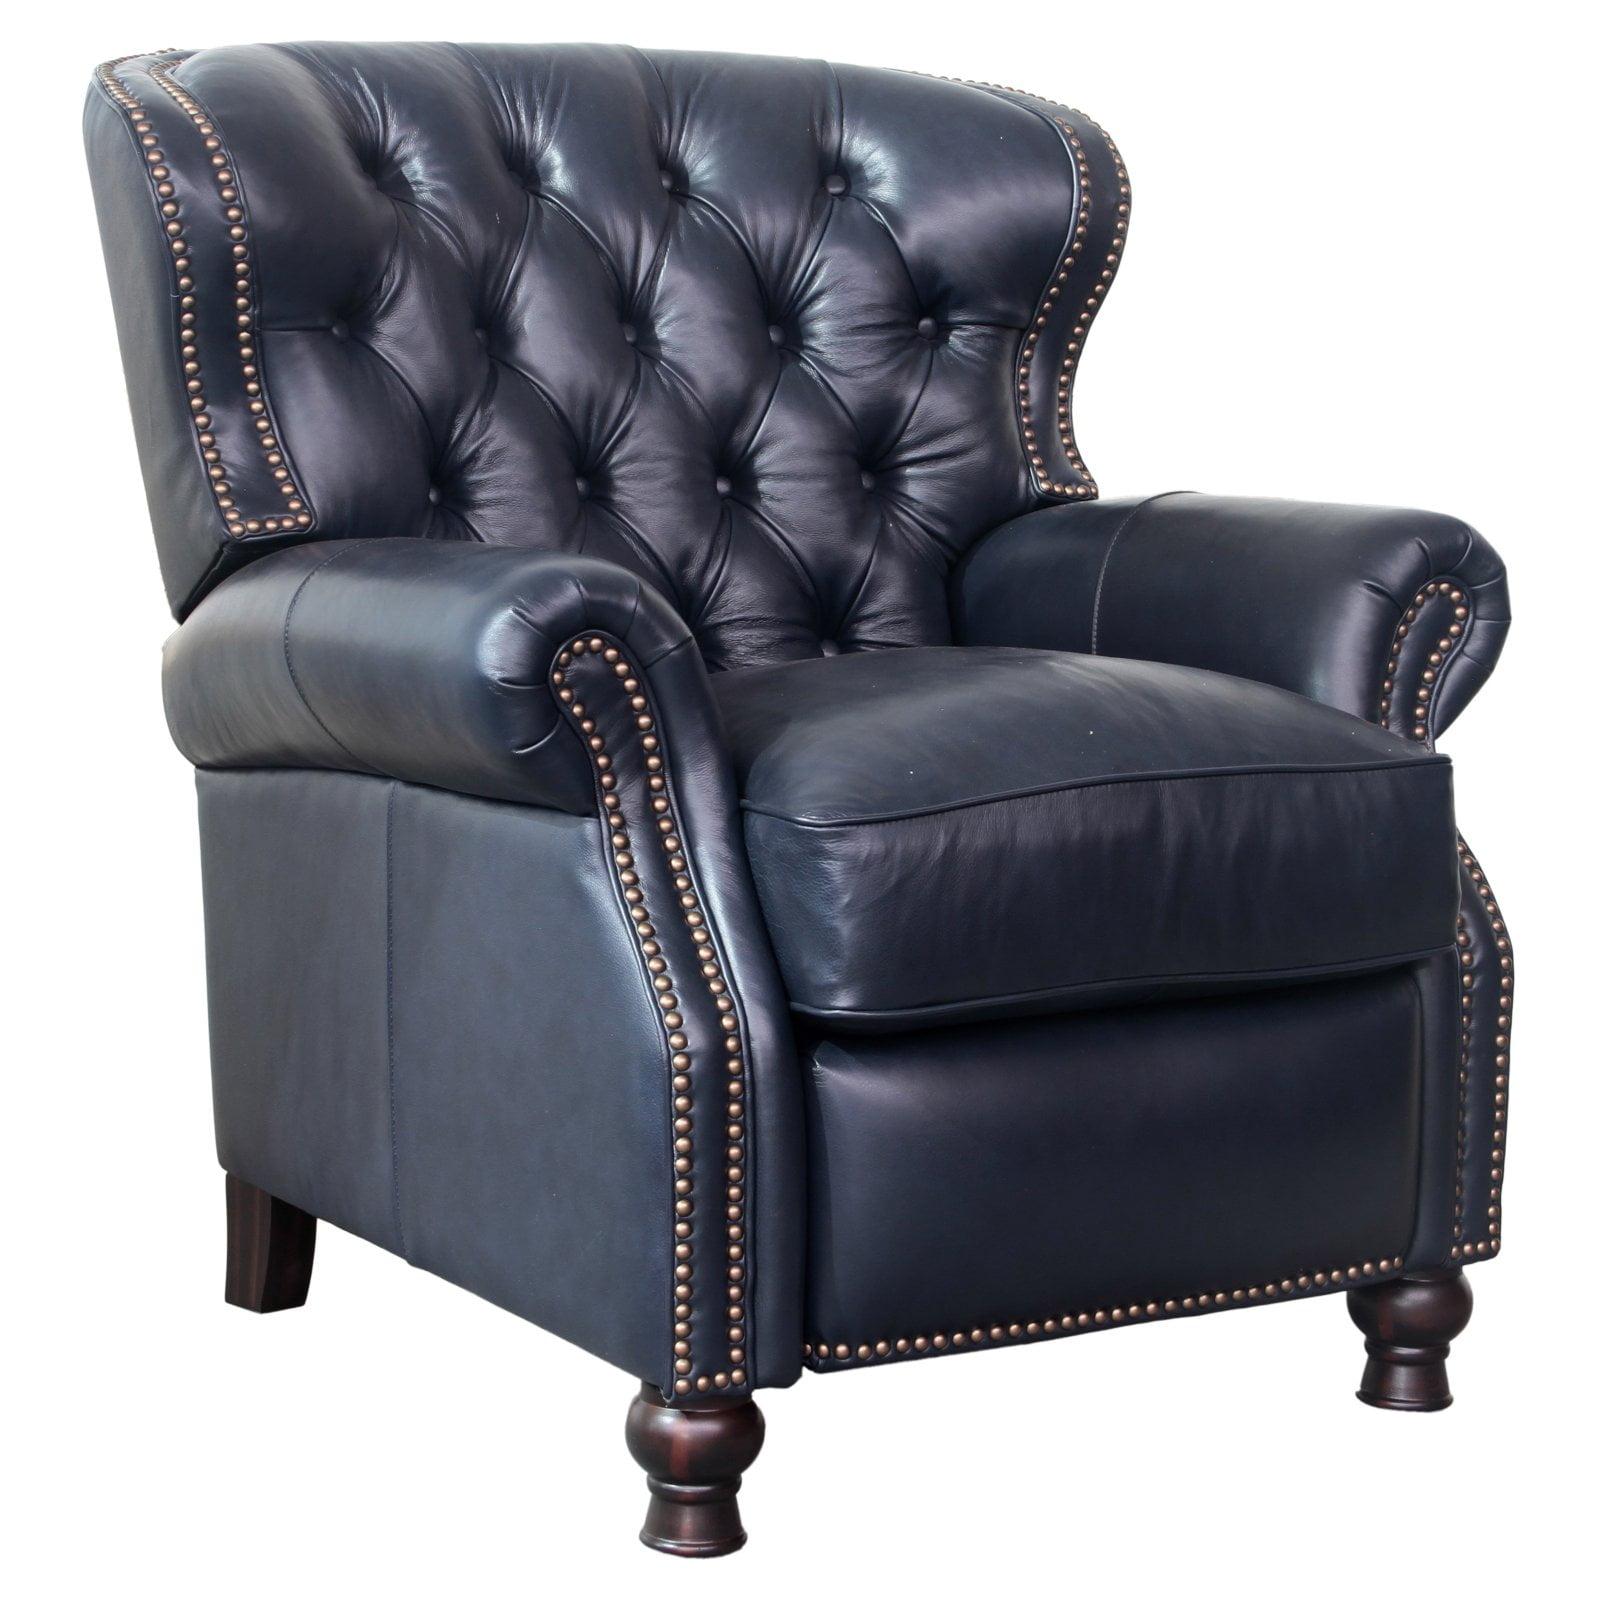 Handcrafted Brown Leather Presidential Recliner with Wood Accents